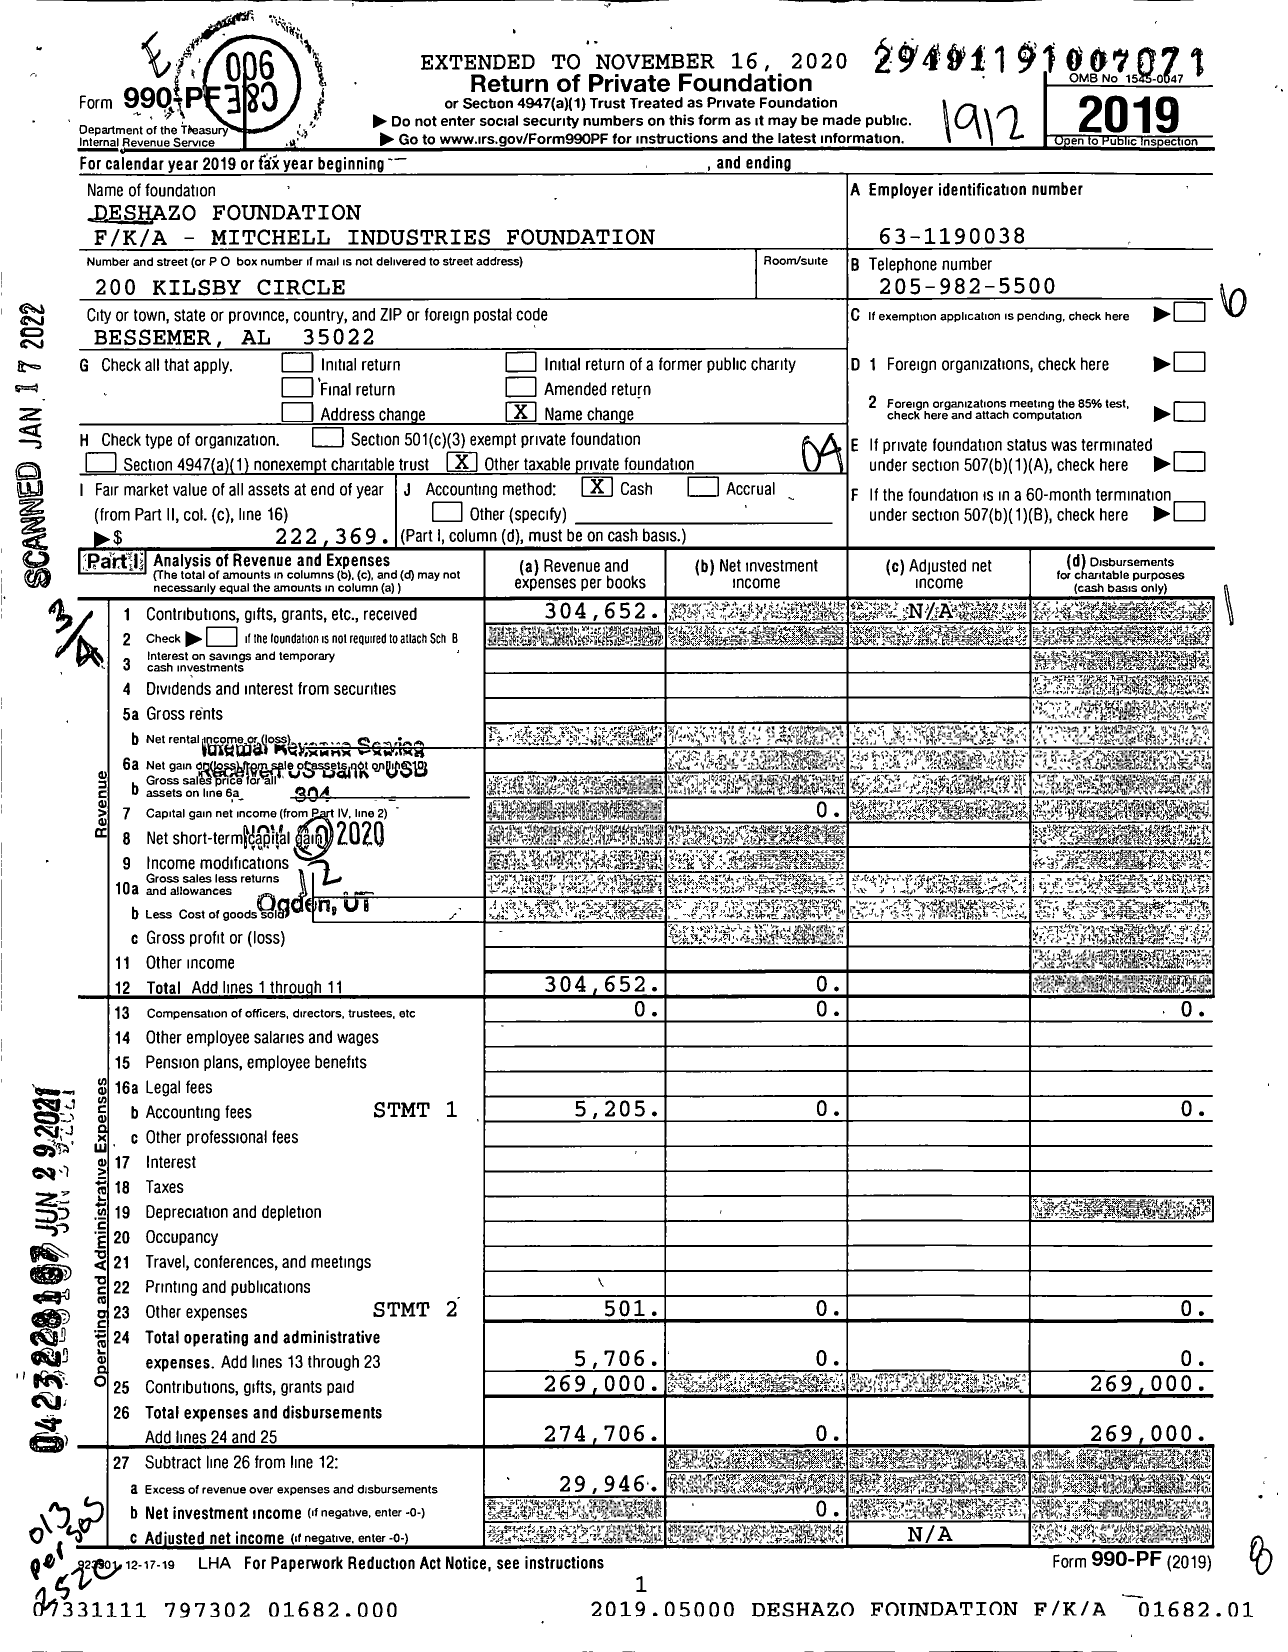 Image of first page of 2019 Form 990PF for Deshazo Foundation Foundation / K / A - Mitchell Industries Foundation